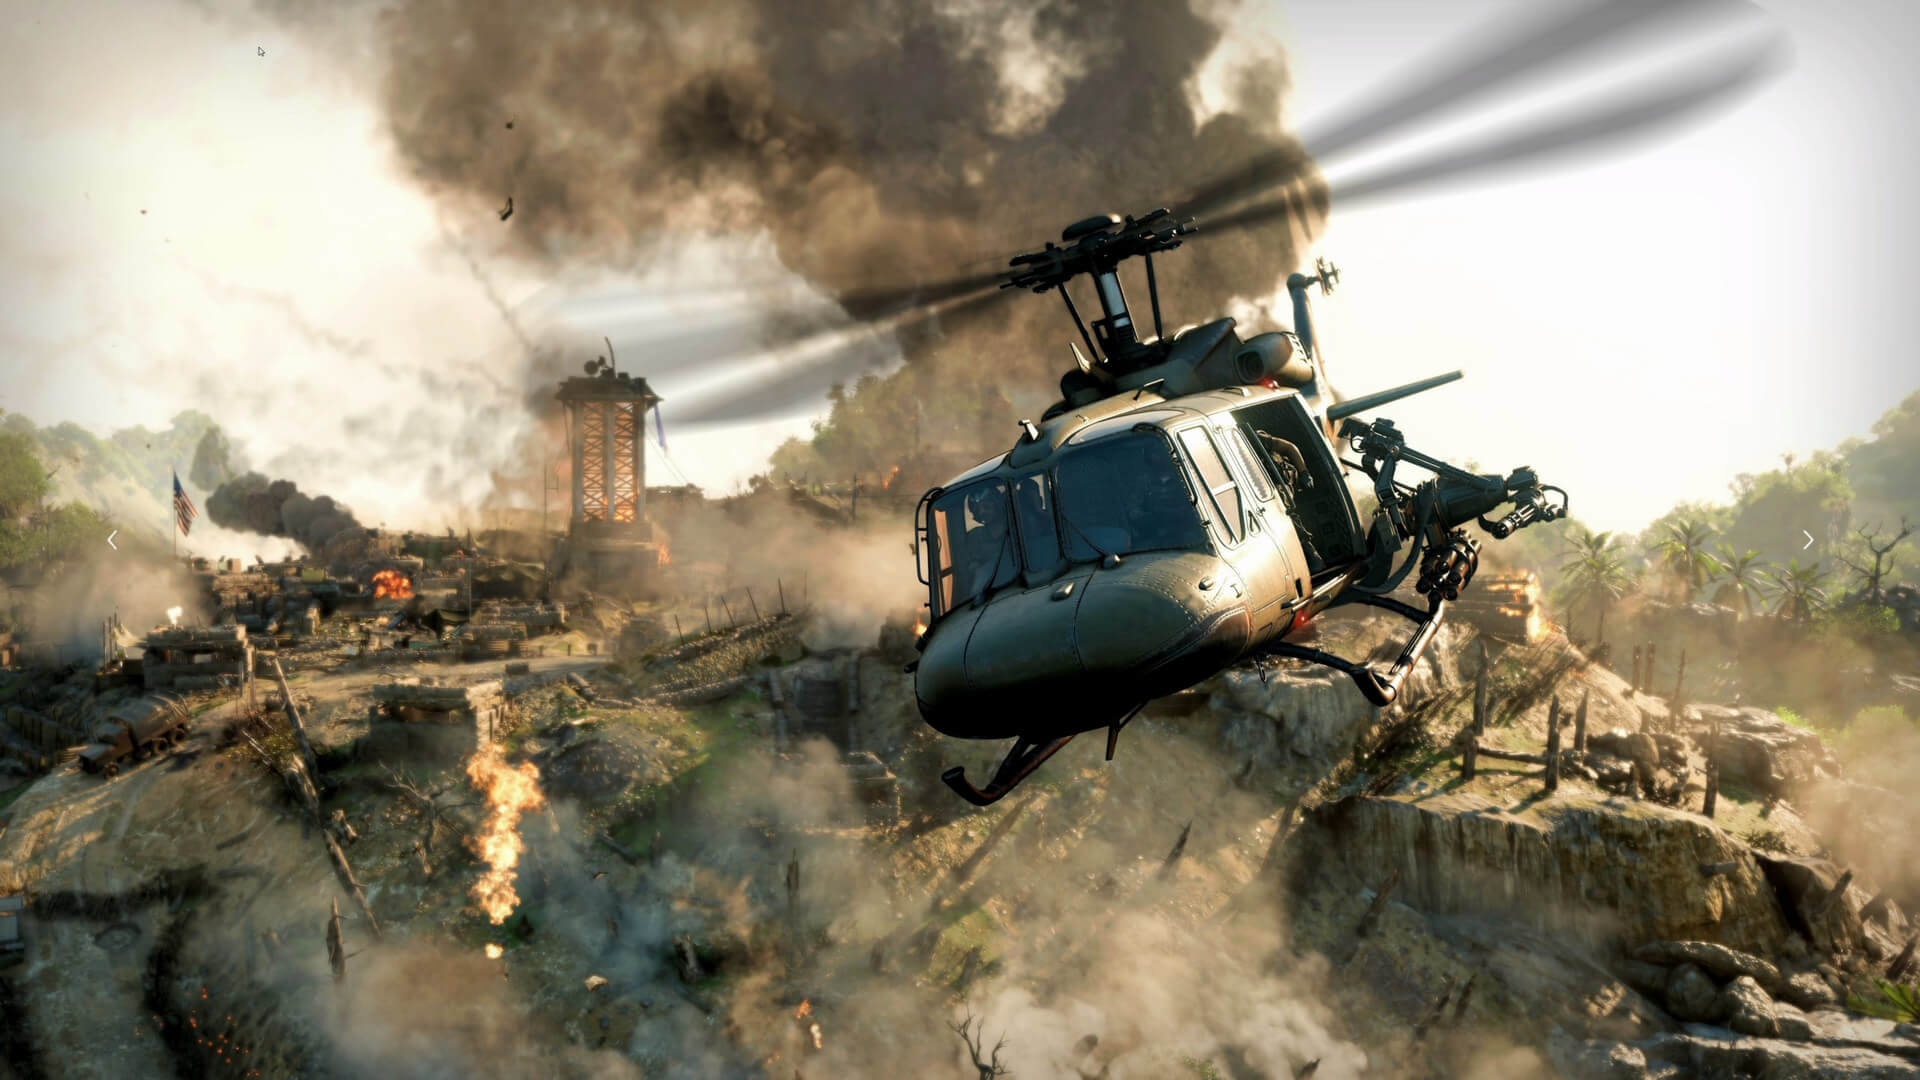 Call Of Duty Black Ops Cold War Zombies Call Of Duty Call Of Duty Black Ops Video Games CGi Helicopt 1920x1080